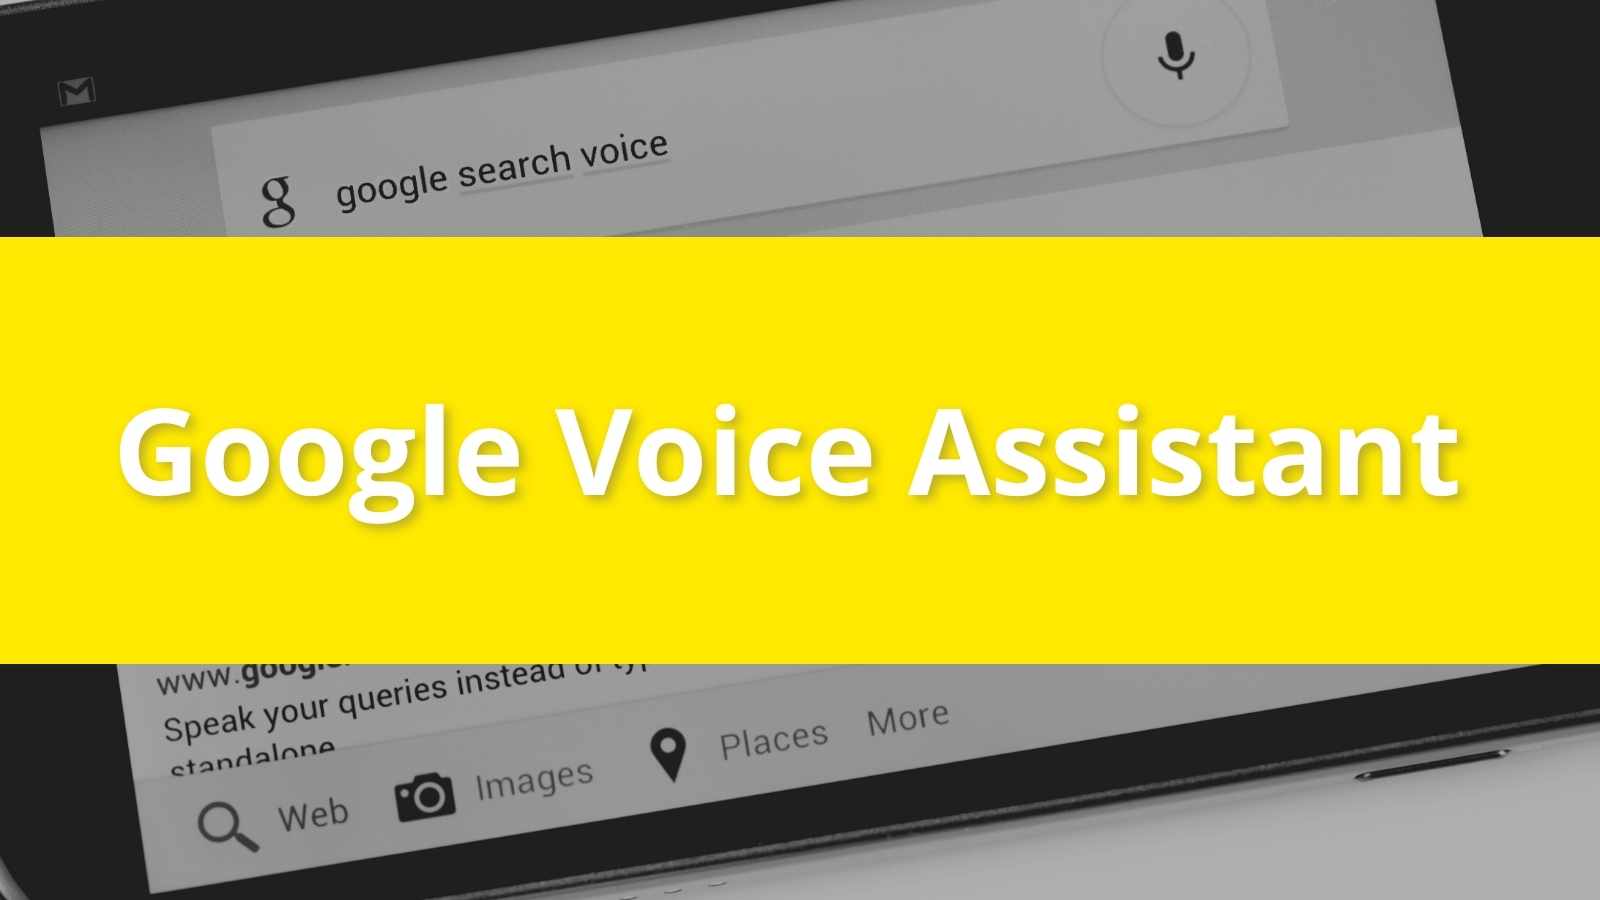 Google Voice Assistance: A Use Case In The Customer Journey